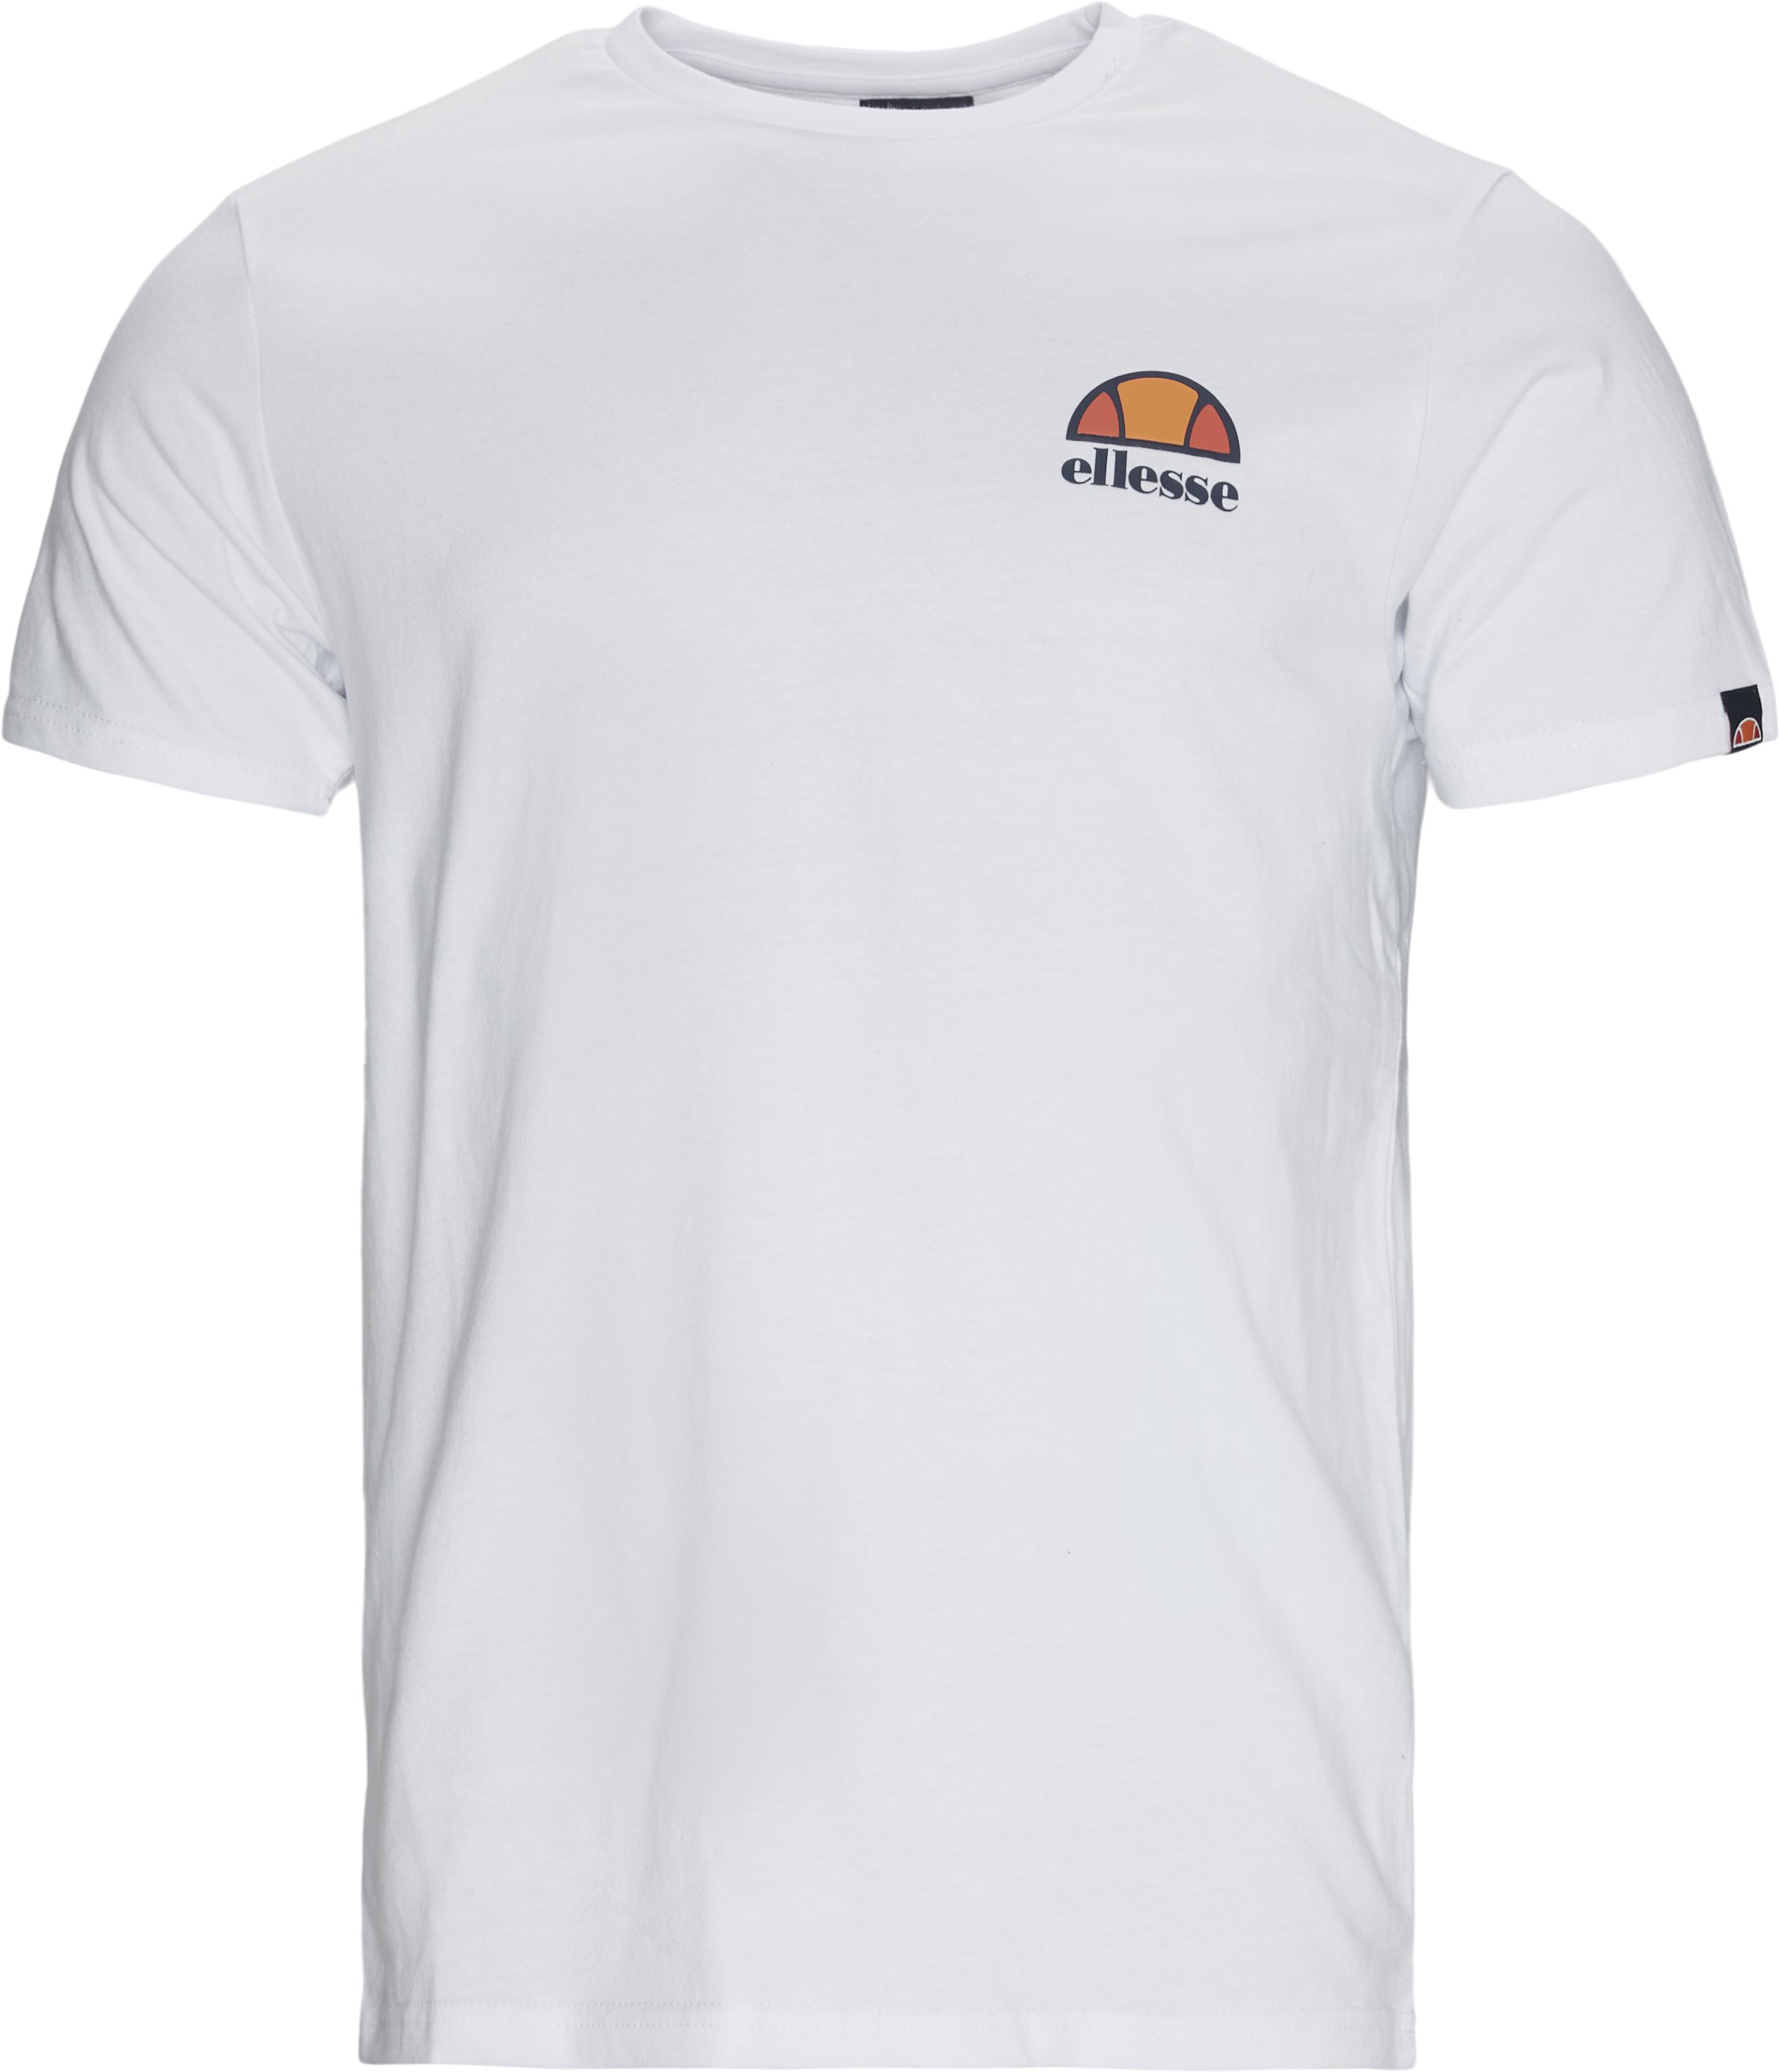 ellesse Classic Canaletto Crew Neck Plain T-Shirt Retro Sports Top Casual Tee